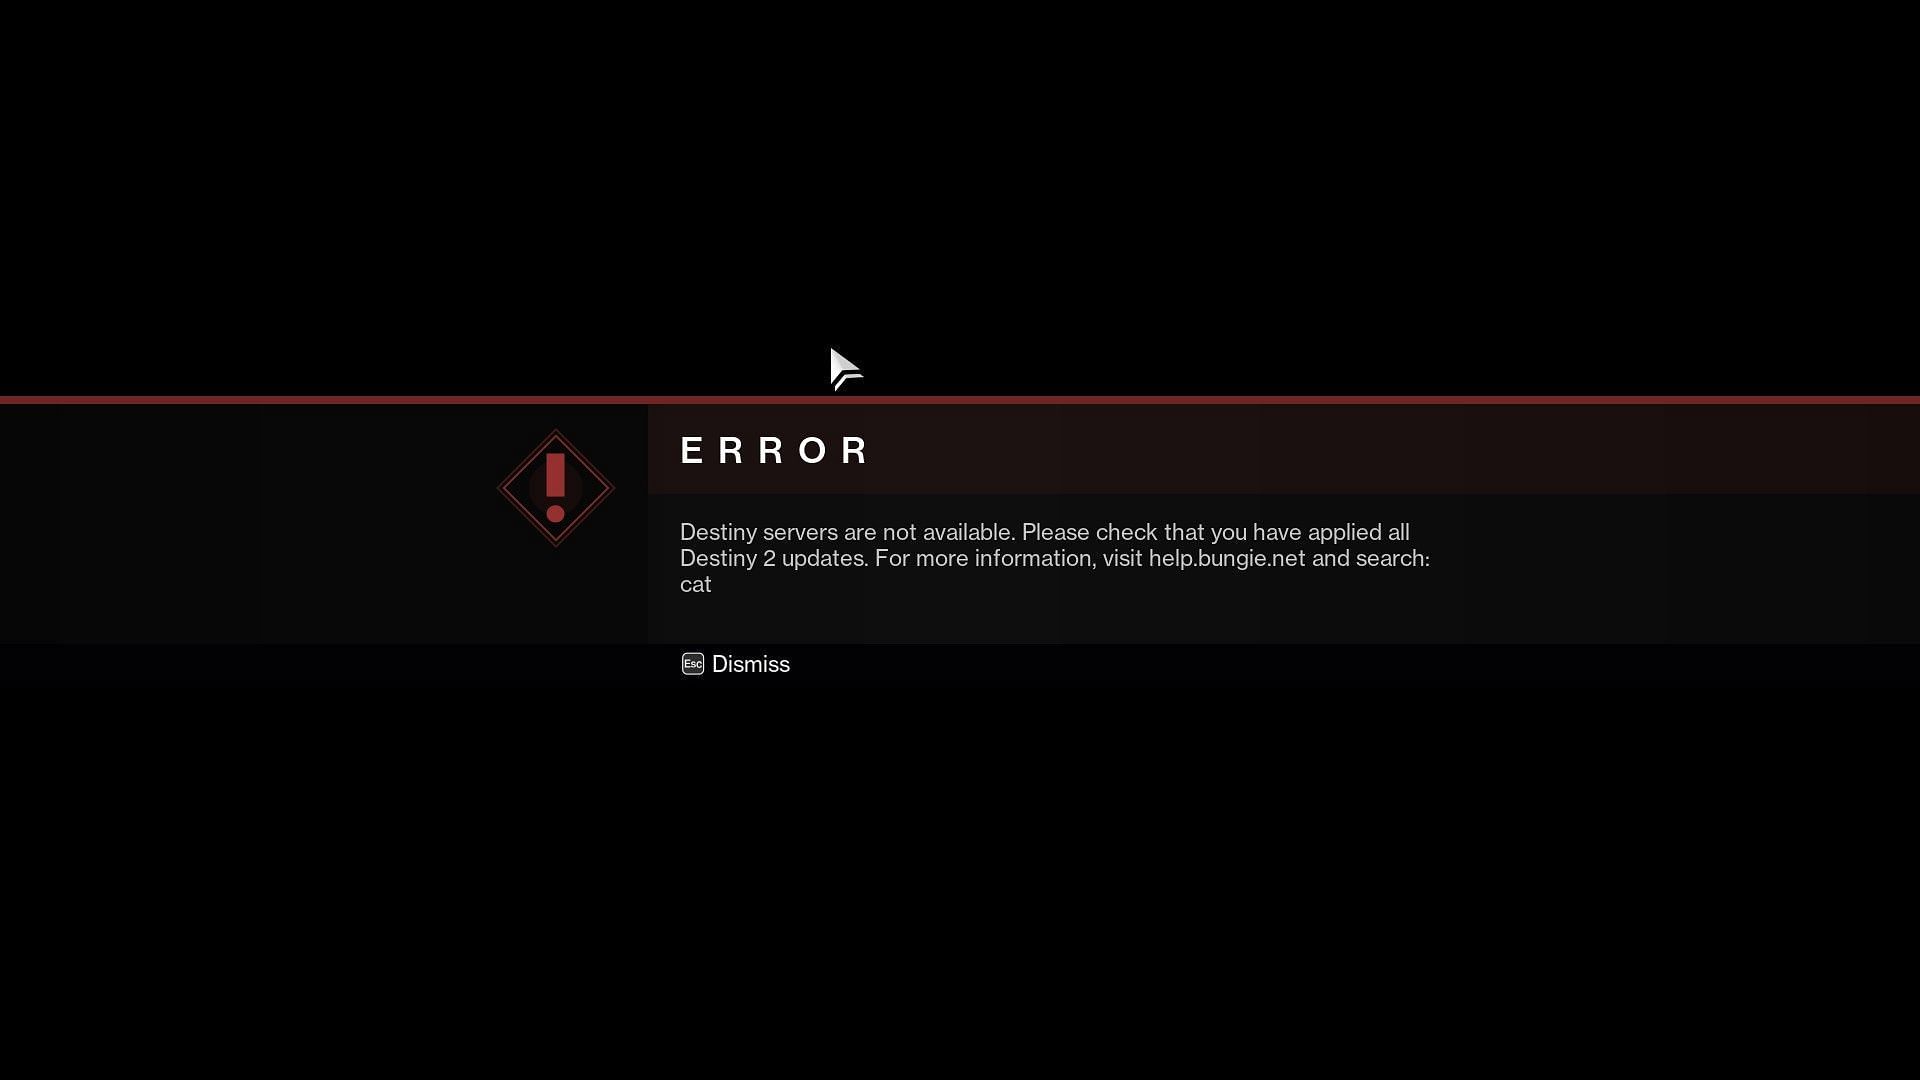 Destiny 2 error code CAT as shown in the game currently (Image via Bungie)